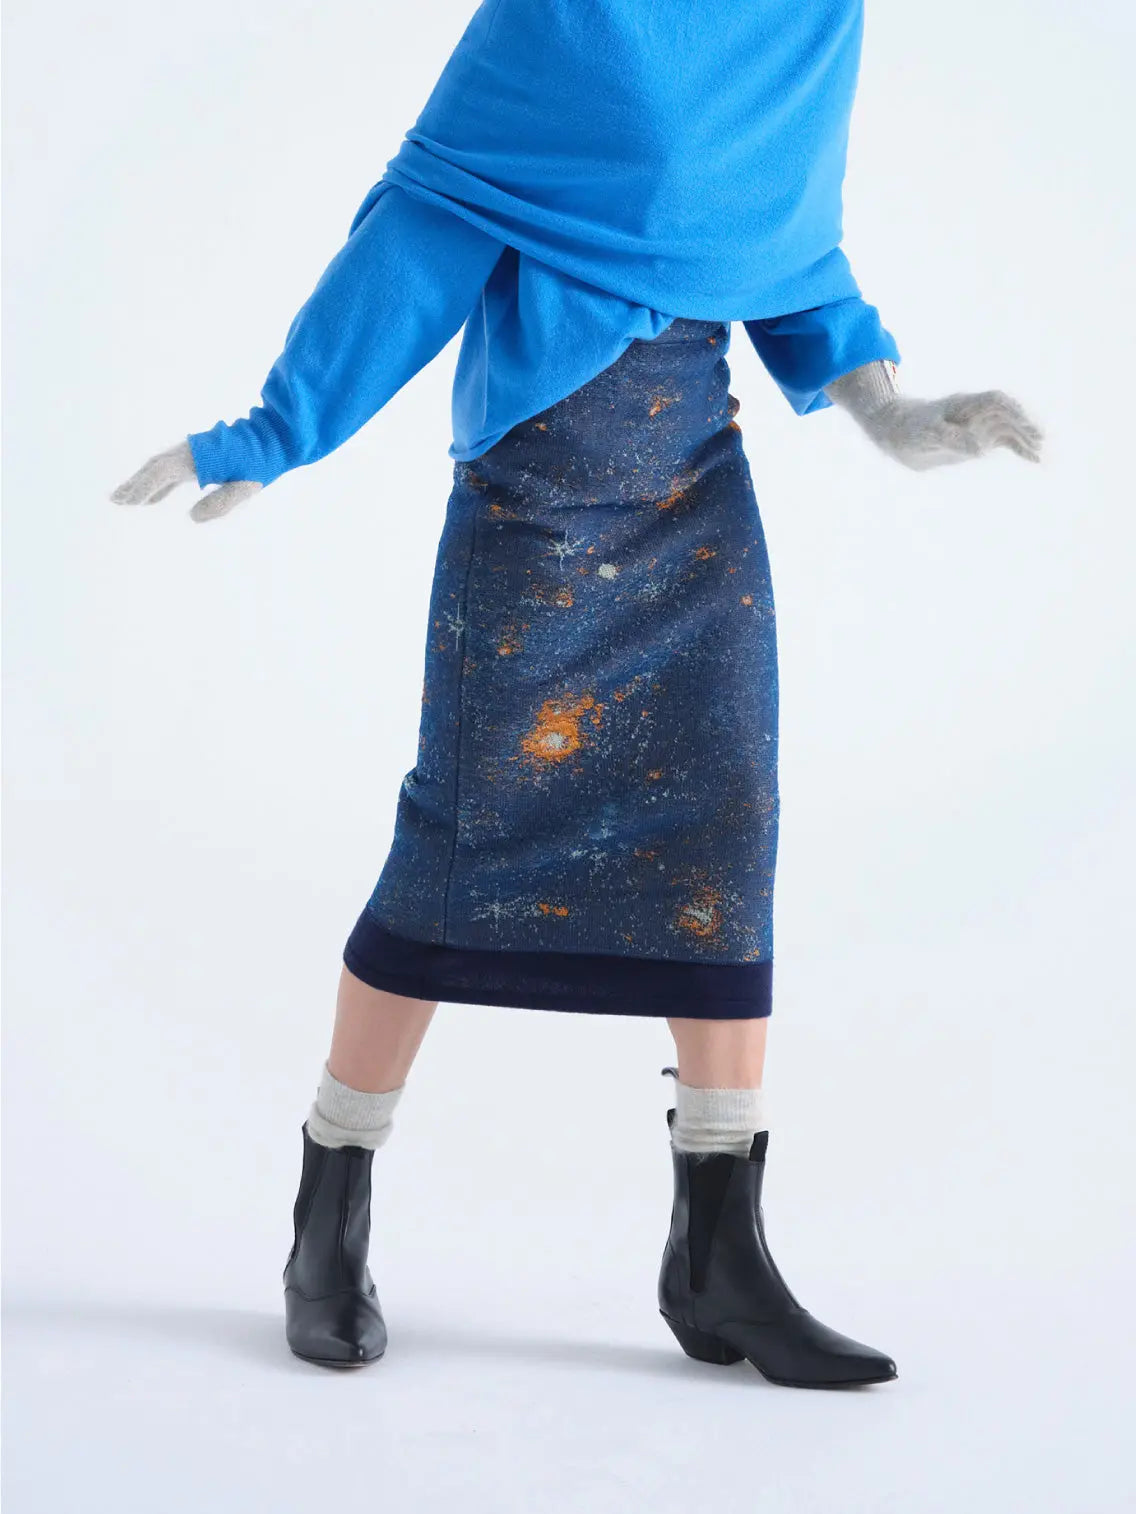 A Bielo Galaxy Skirt Navy, featuring a galaxy-inspired design with blues, oranges, and whites representing stars and cosmic dust on a dark blue background – available exclusively at Bassalstore in Barcelona.